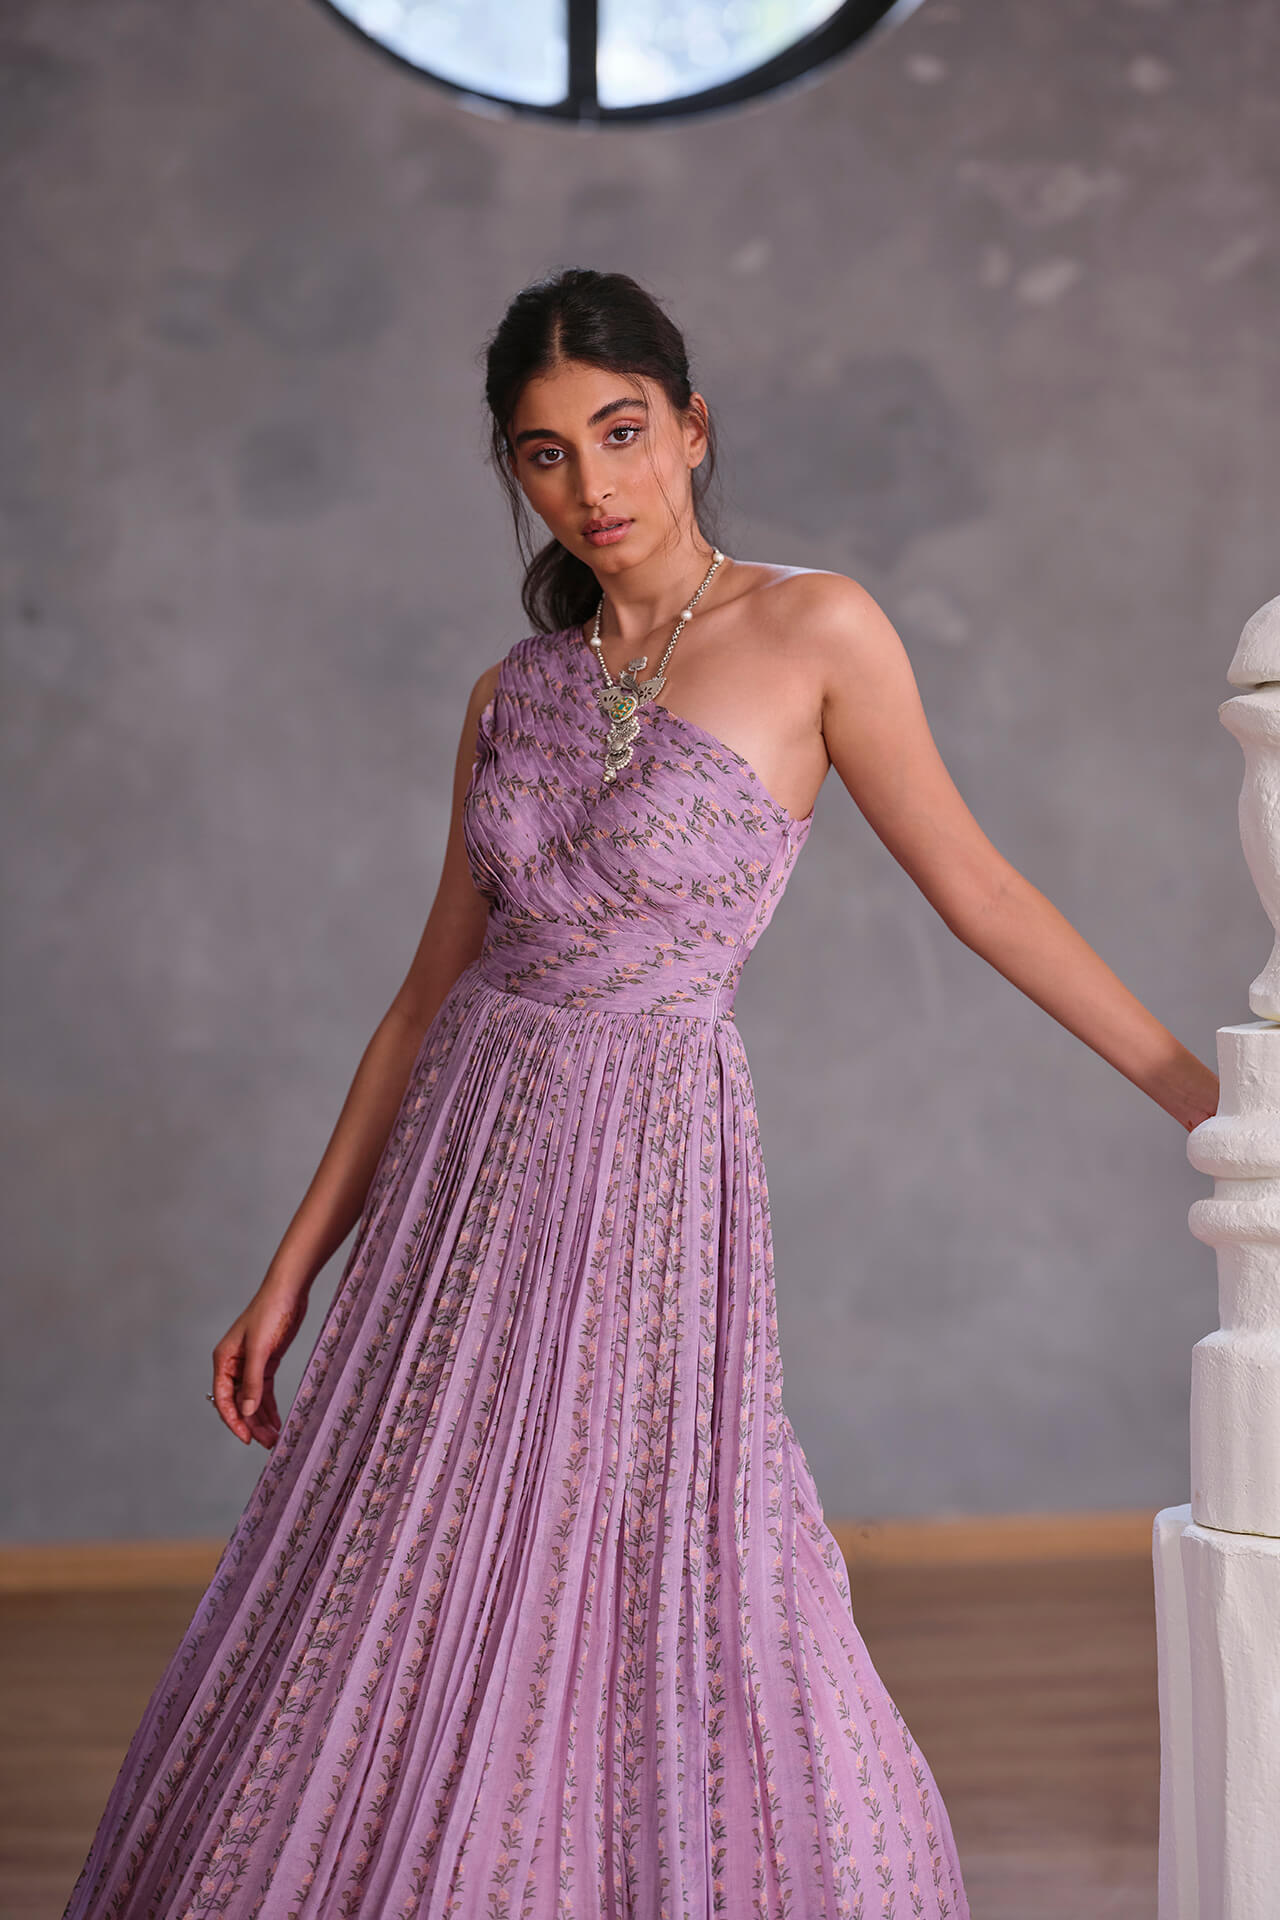 Xijun Lavender Long Glitter Wedding Party Dresses Sweetheart Sequined Beads  Prom Gowns Formal Princess Bridal Gowns For Women - AliExpress